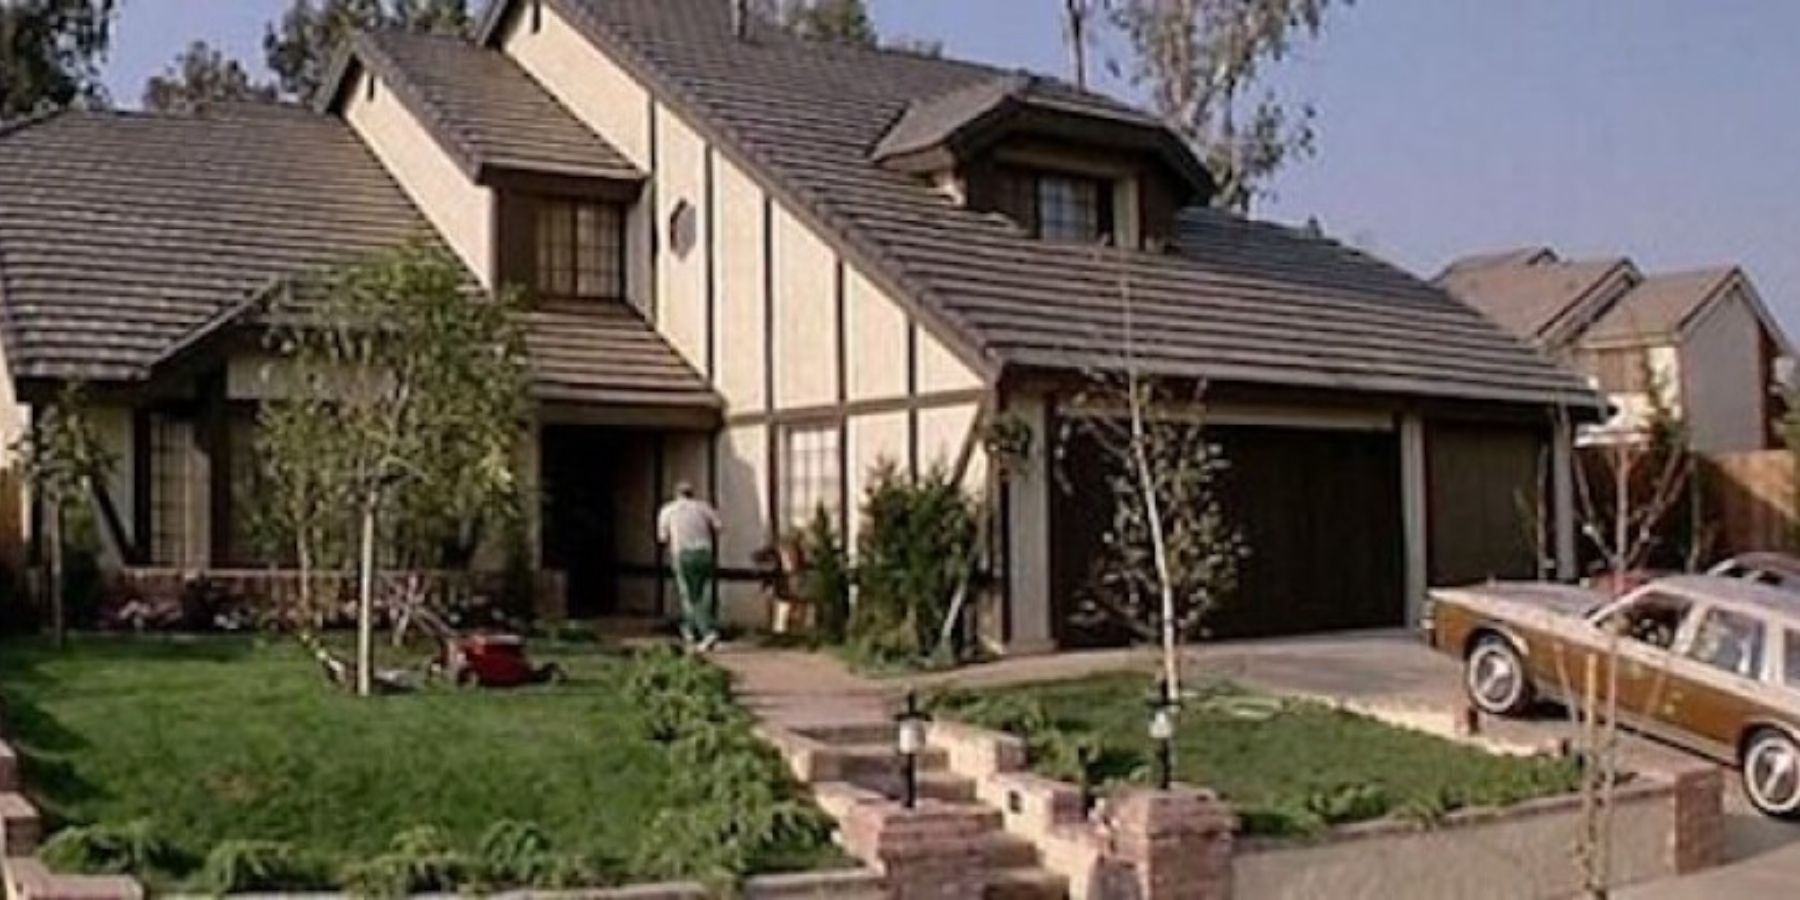 The outside of the house from Poltergeist